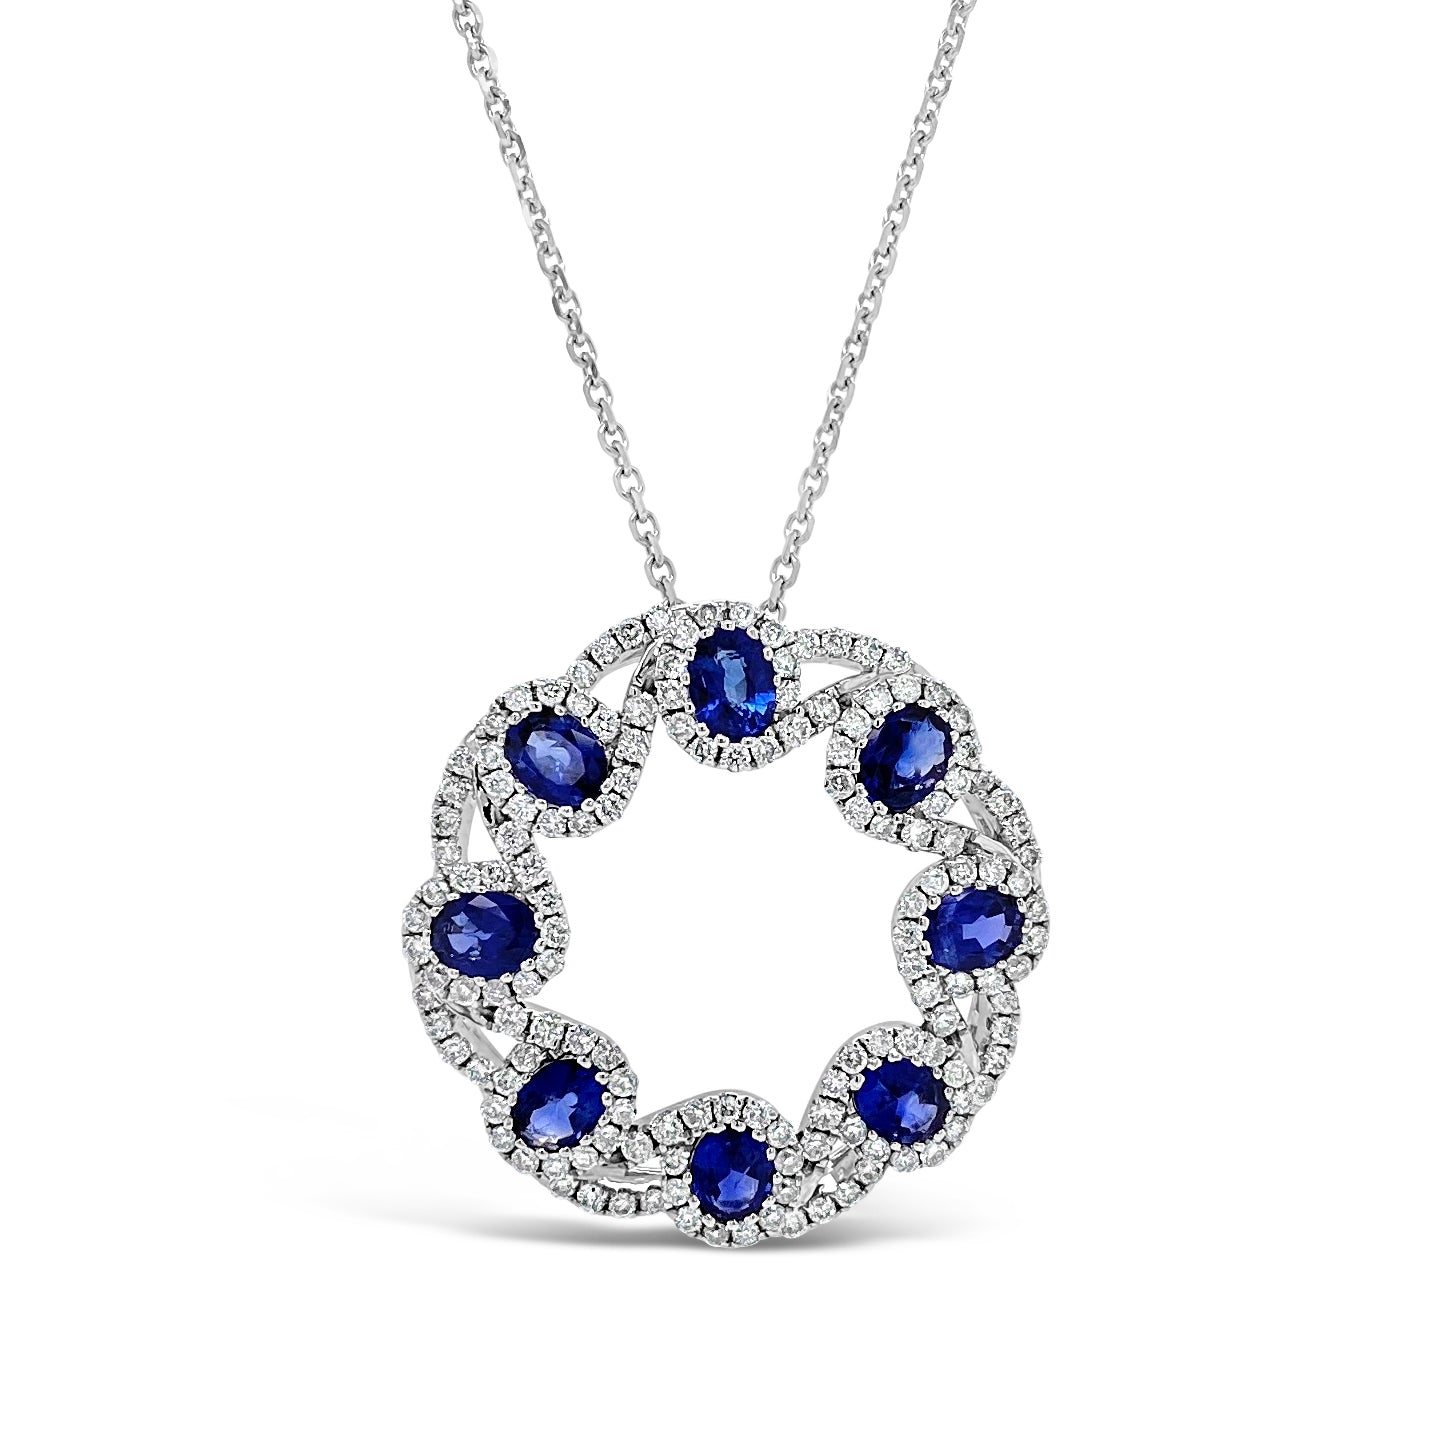 Sapphire & Diamond Woven Circle Pendant  - 14K gold weighing 5.82 grams  - 8 oval-shaped sapphires totaling 1.62 carats  - 144 round diamonds totaling 0.80 carats